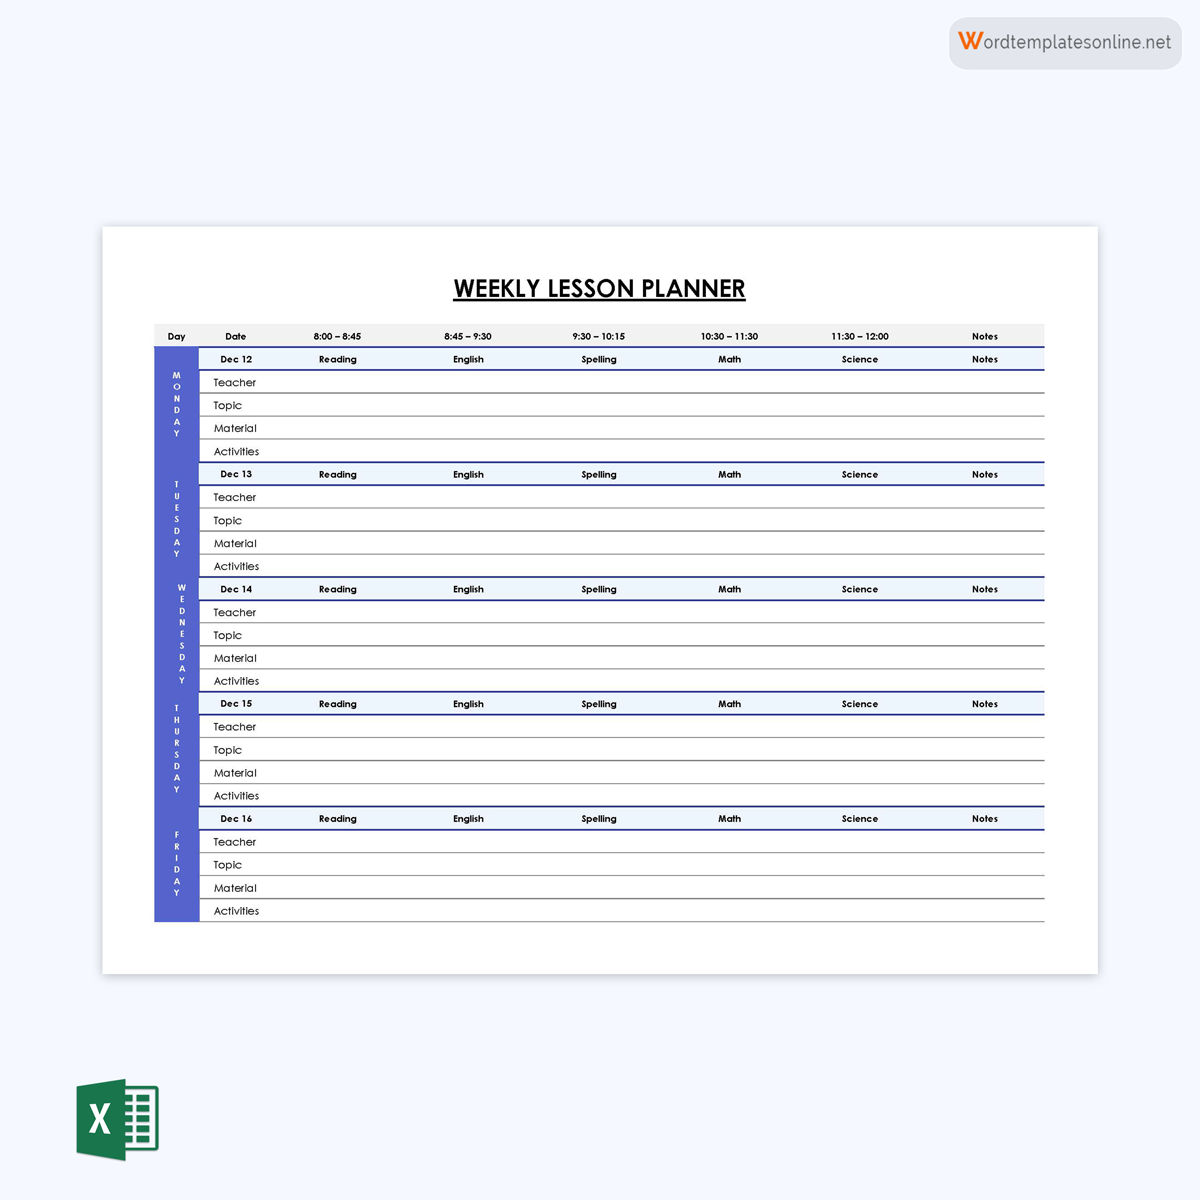 Weekly Lesson Plan excel